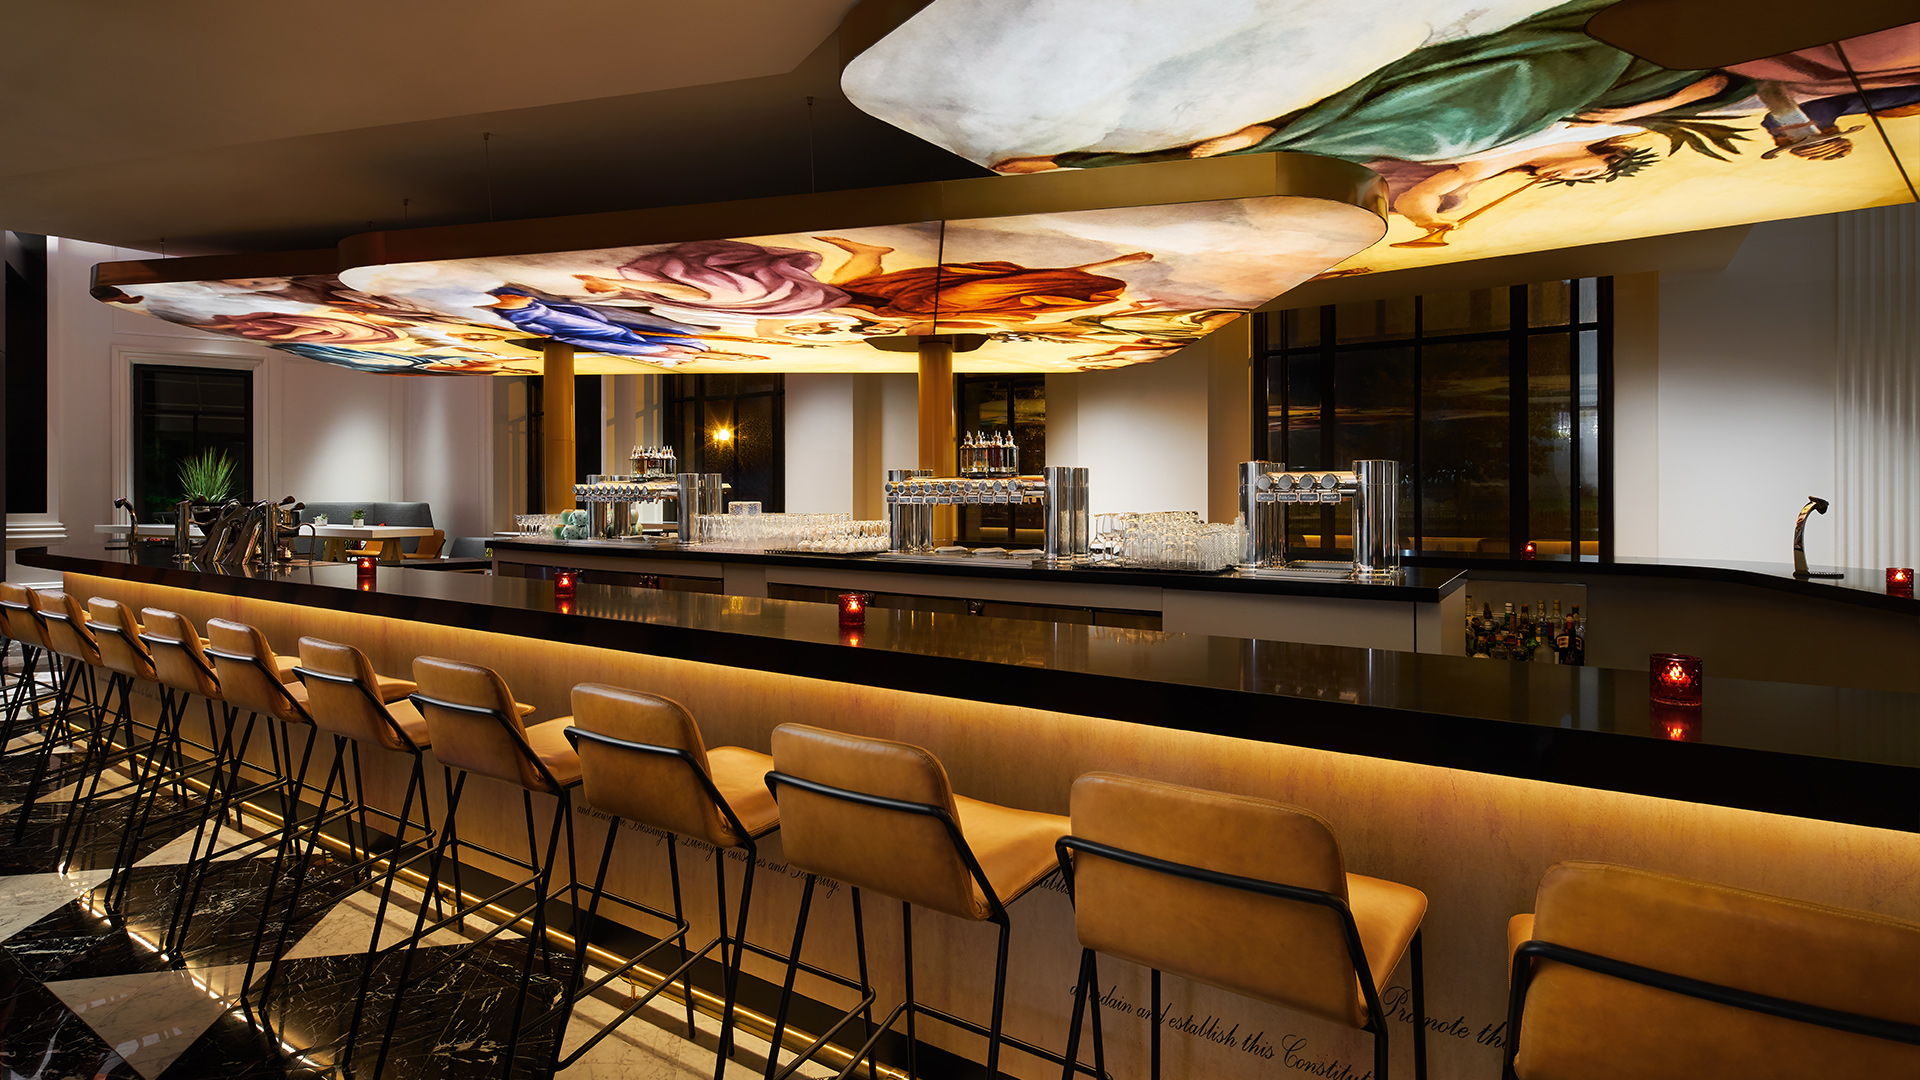 center bar with yellow bar chairs a decorative ceiling lights